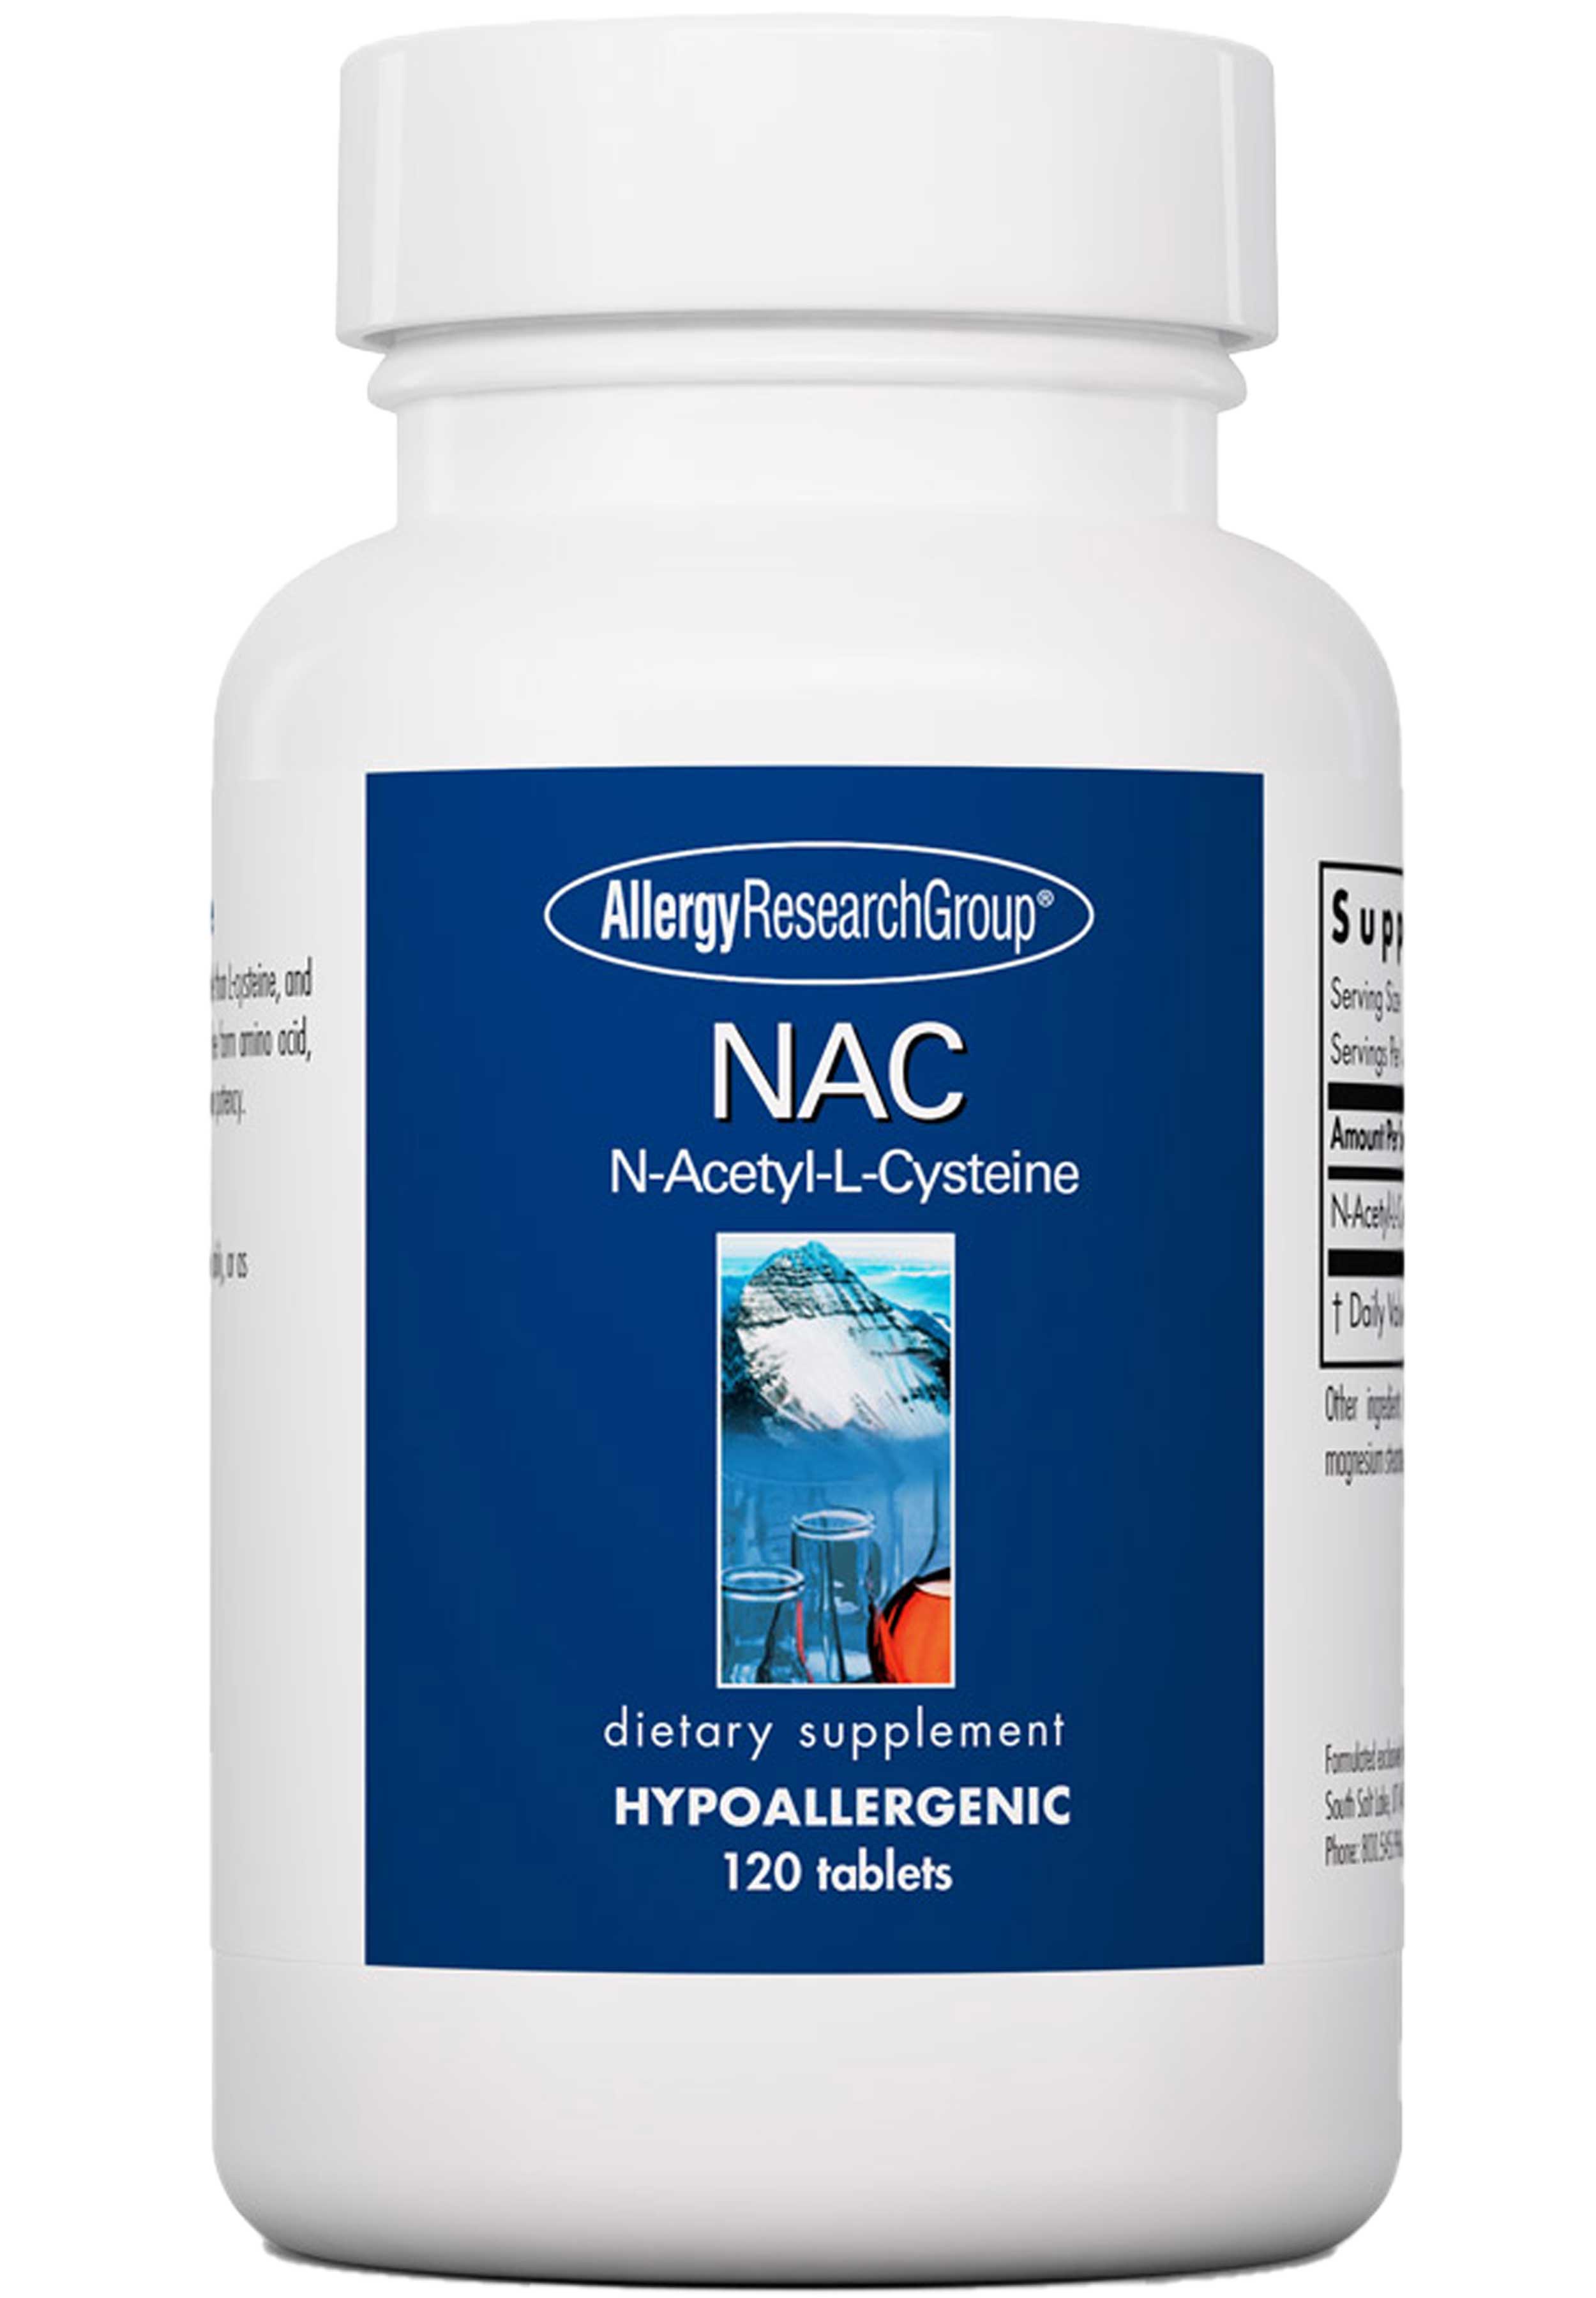 Allergy Research Group NAC N-Acetyl-L-Cysteine